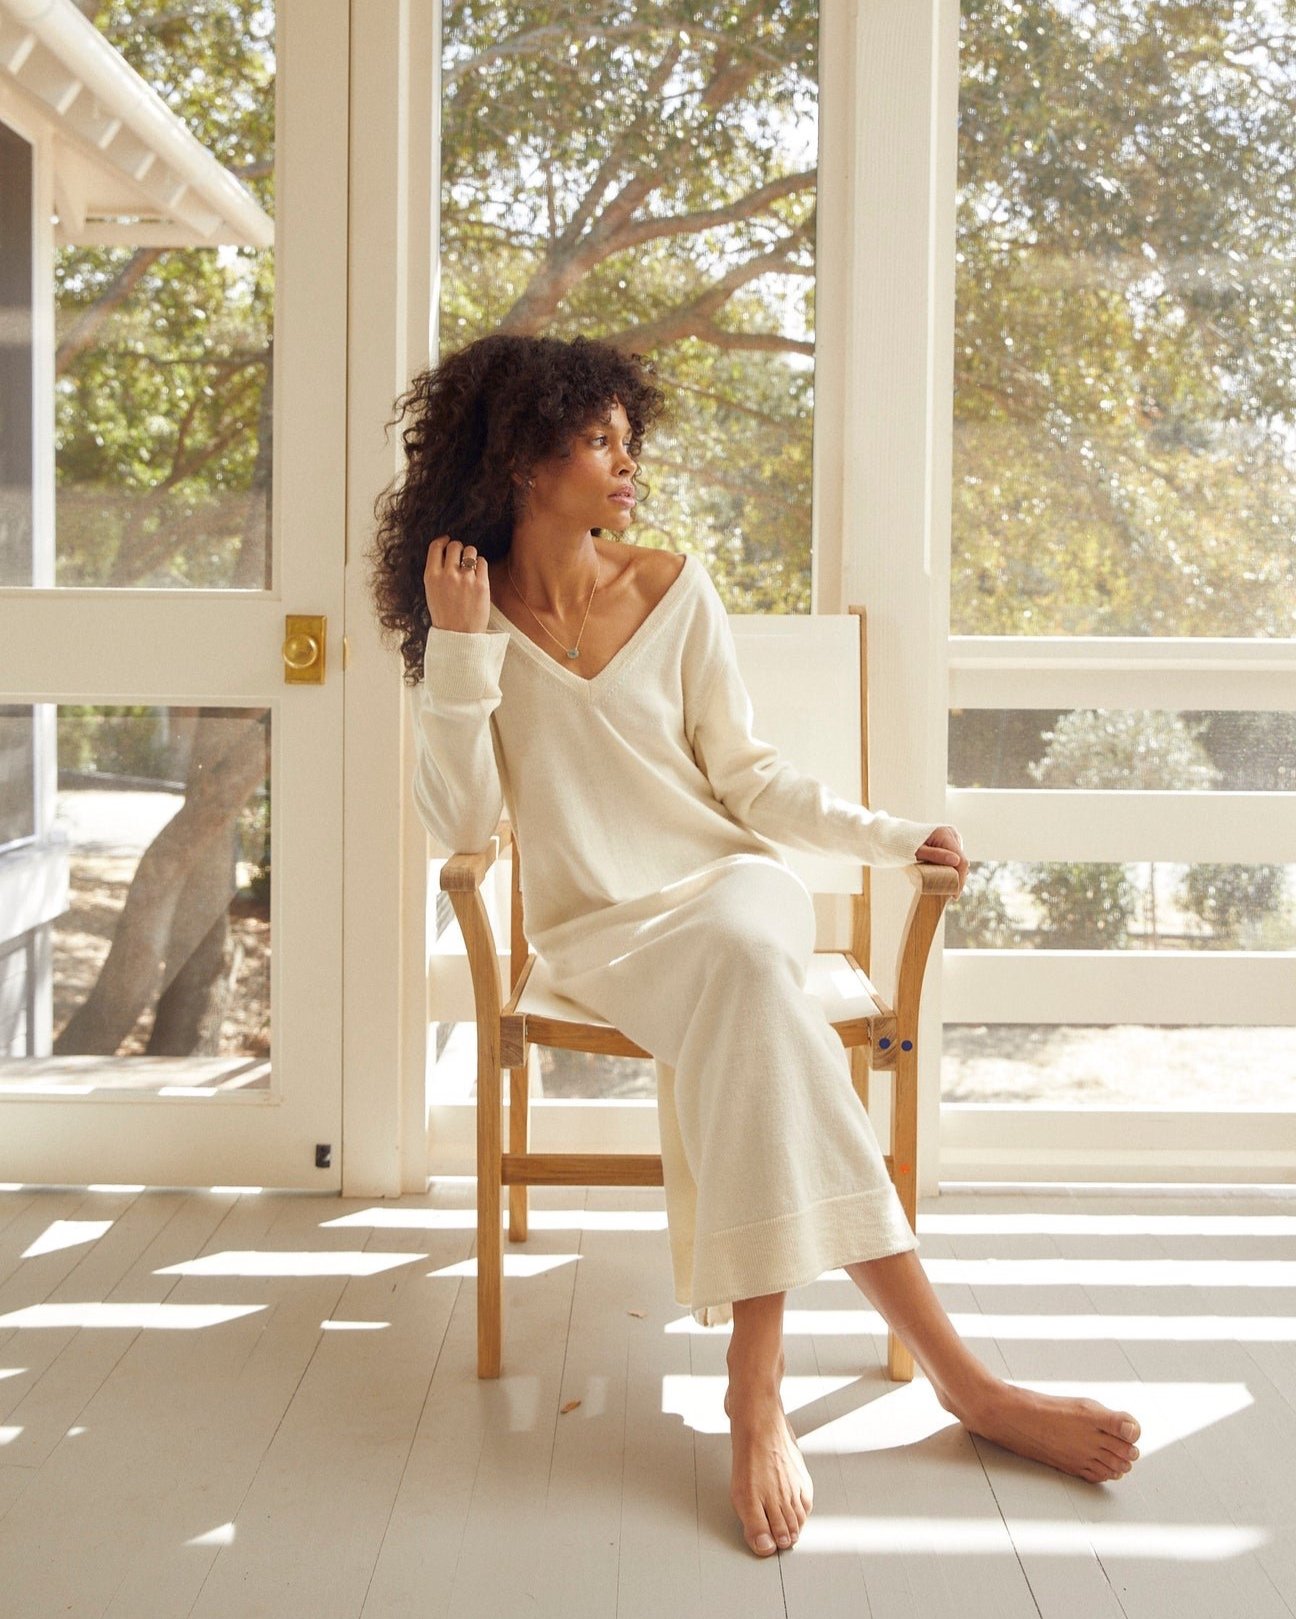 Shop loungewear at SKIMS, from cozy knit tanks and robes to comfortable  lounge pants and more. Free shipping on domestic orde…